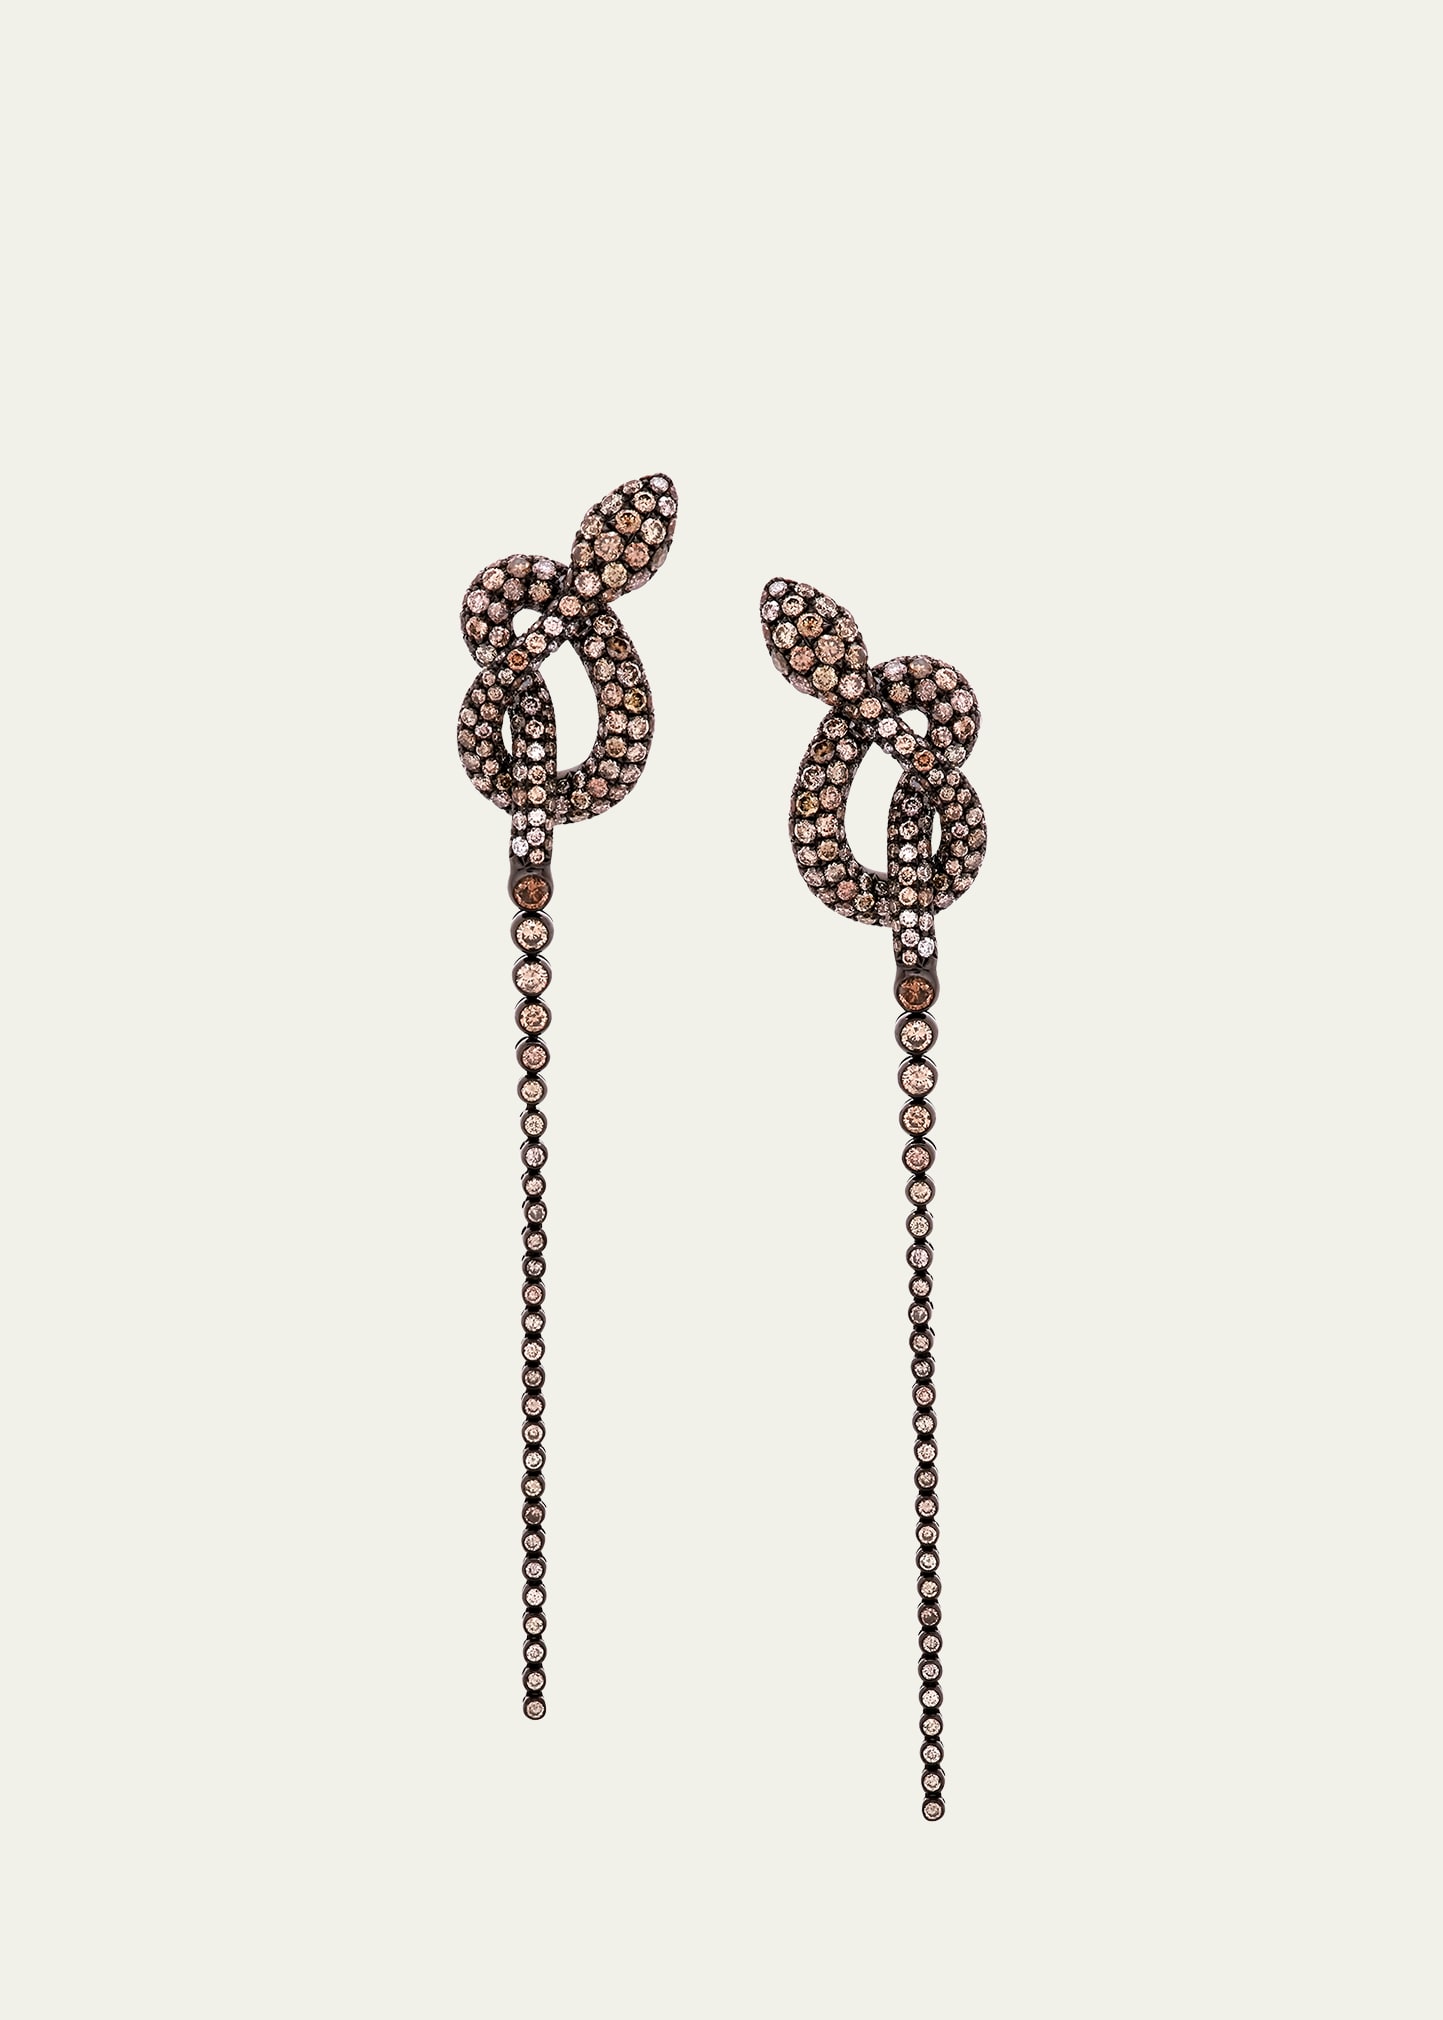 Stefere Yellow Gold Brown Diamond Earrings from The Snake Collection